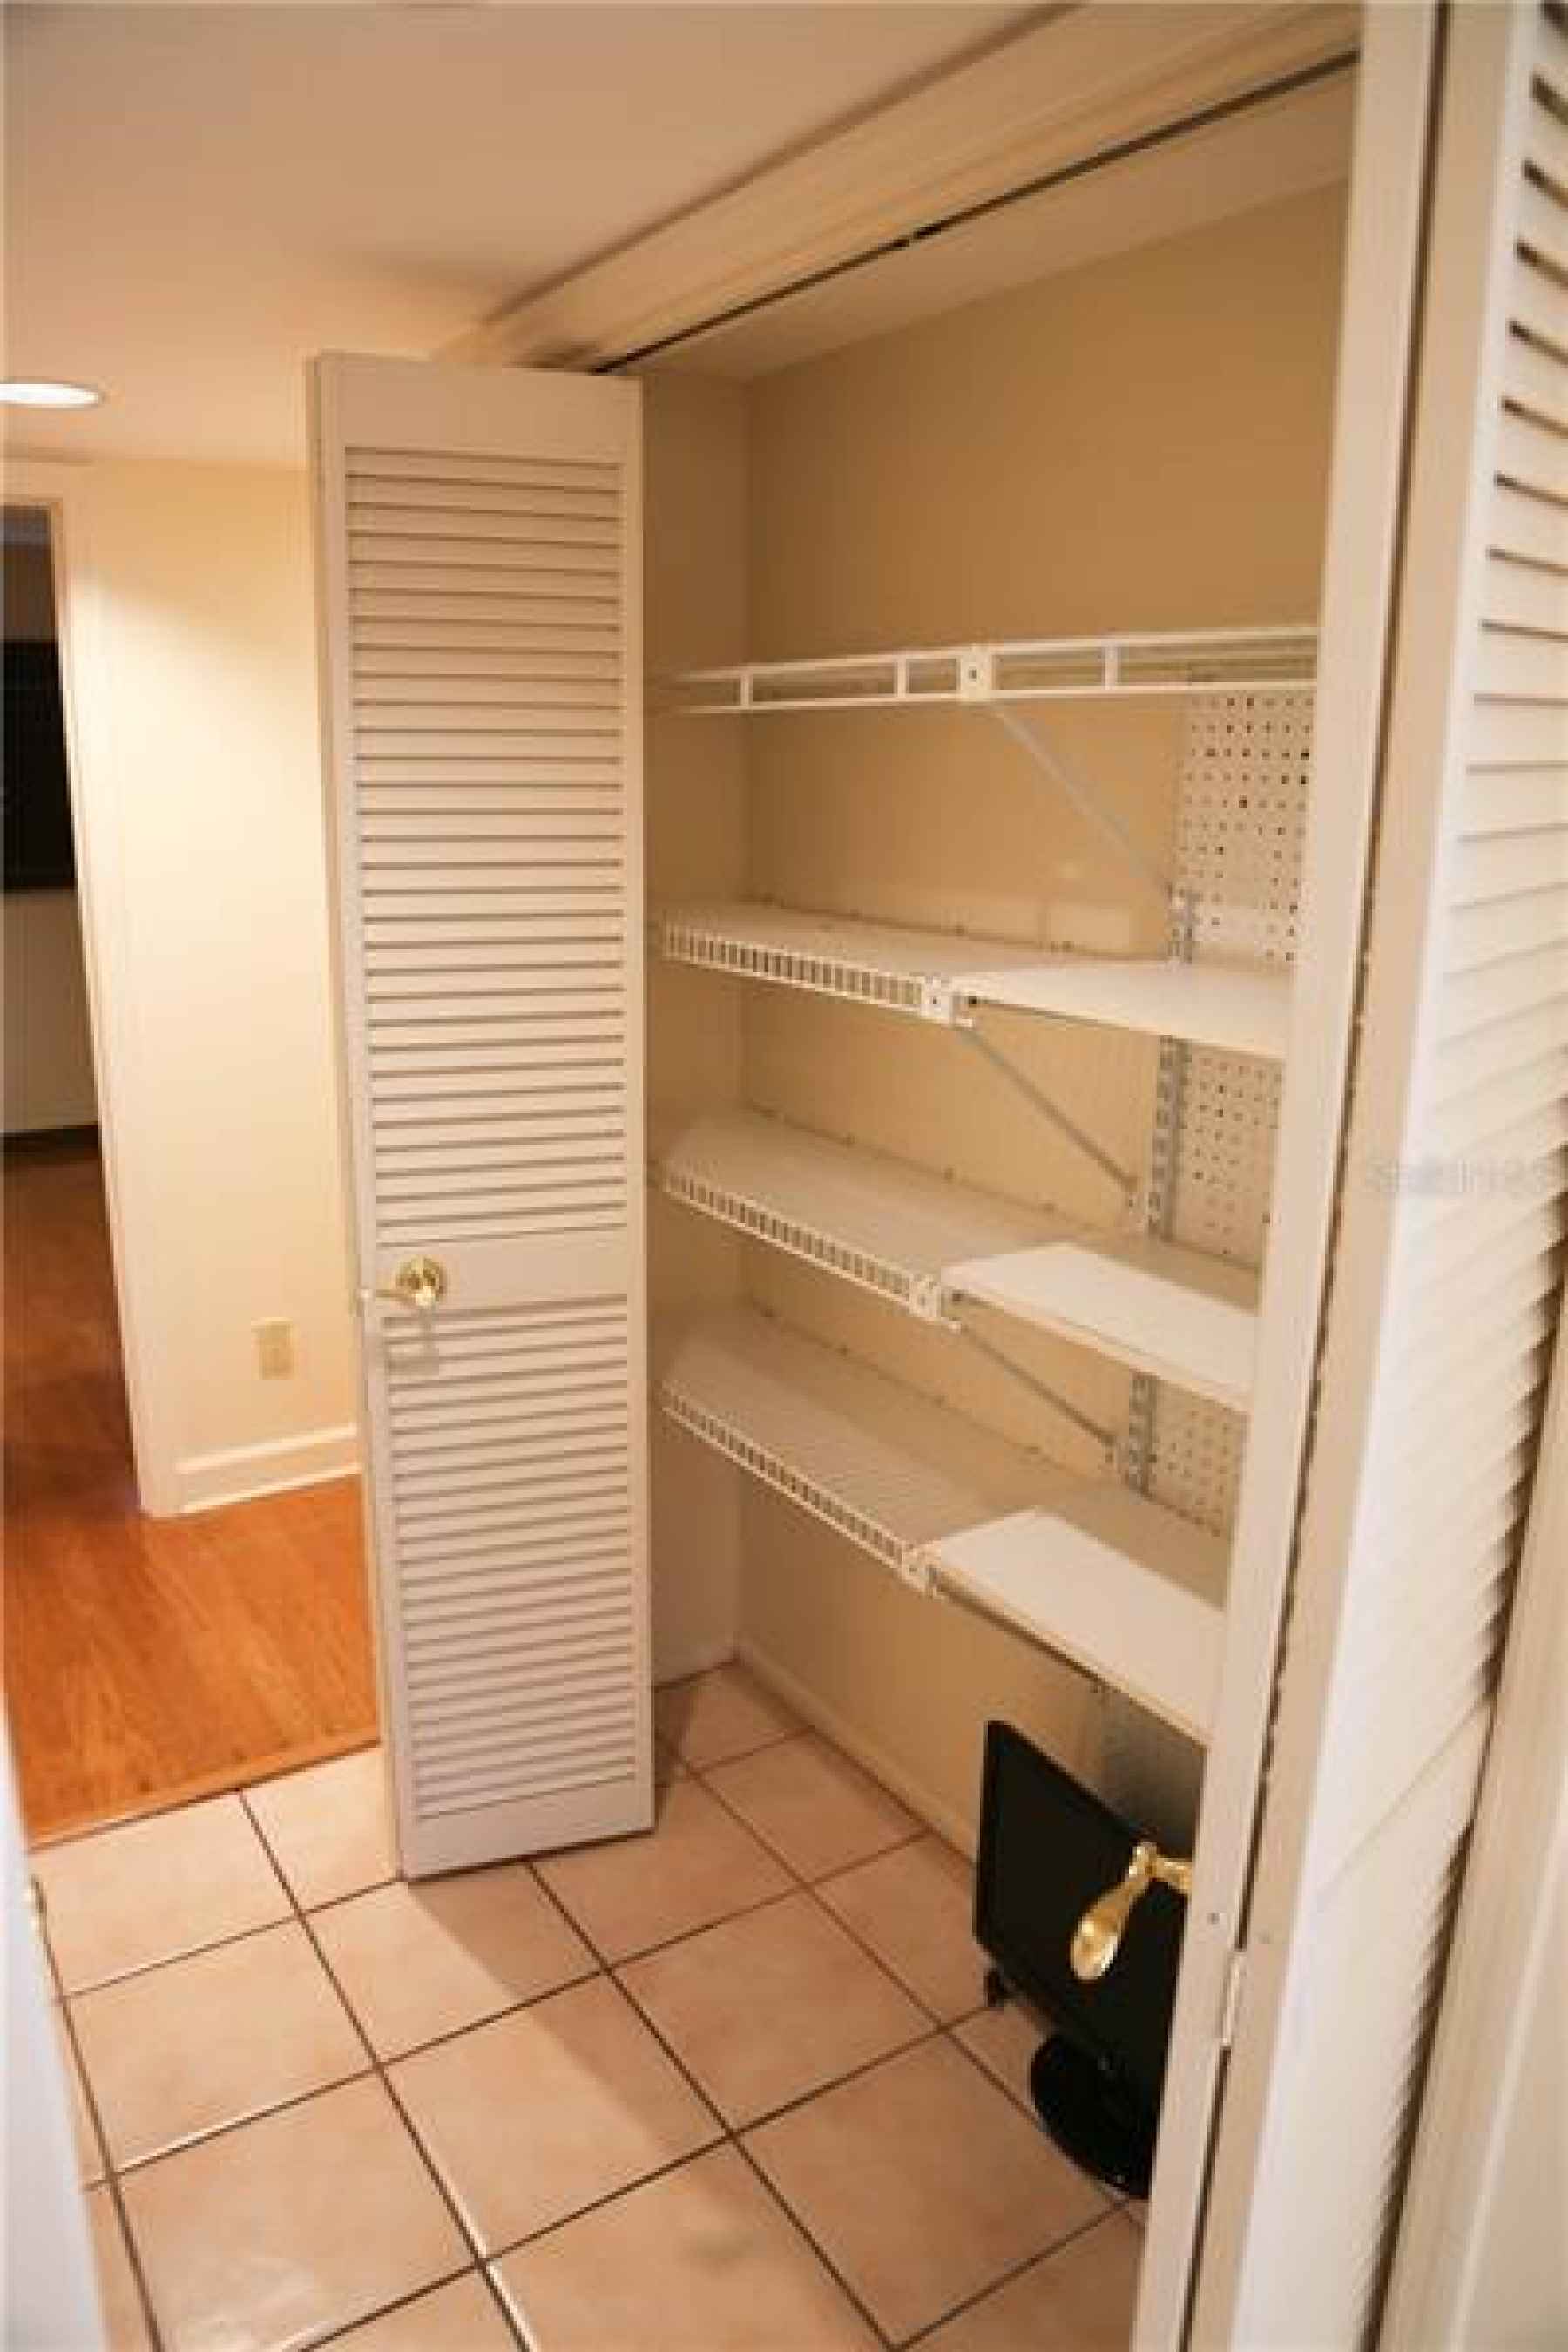 One of 2 pantry closets